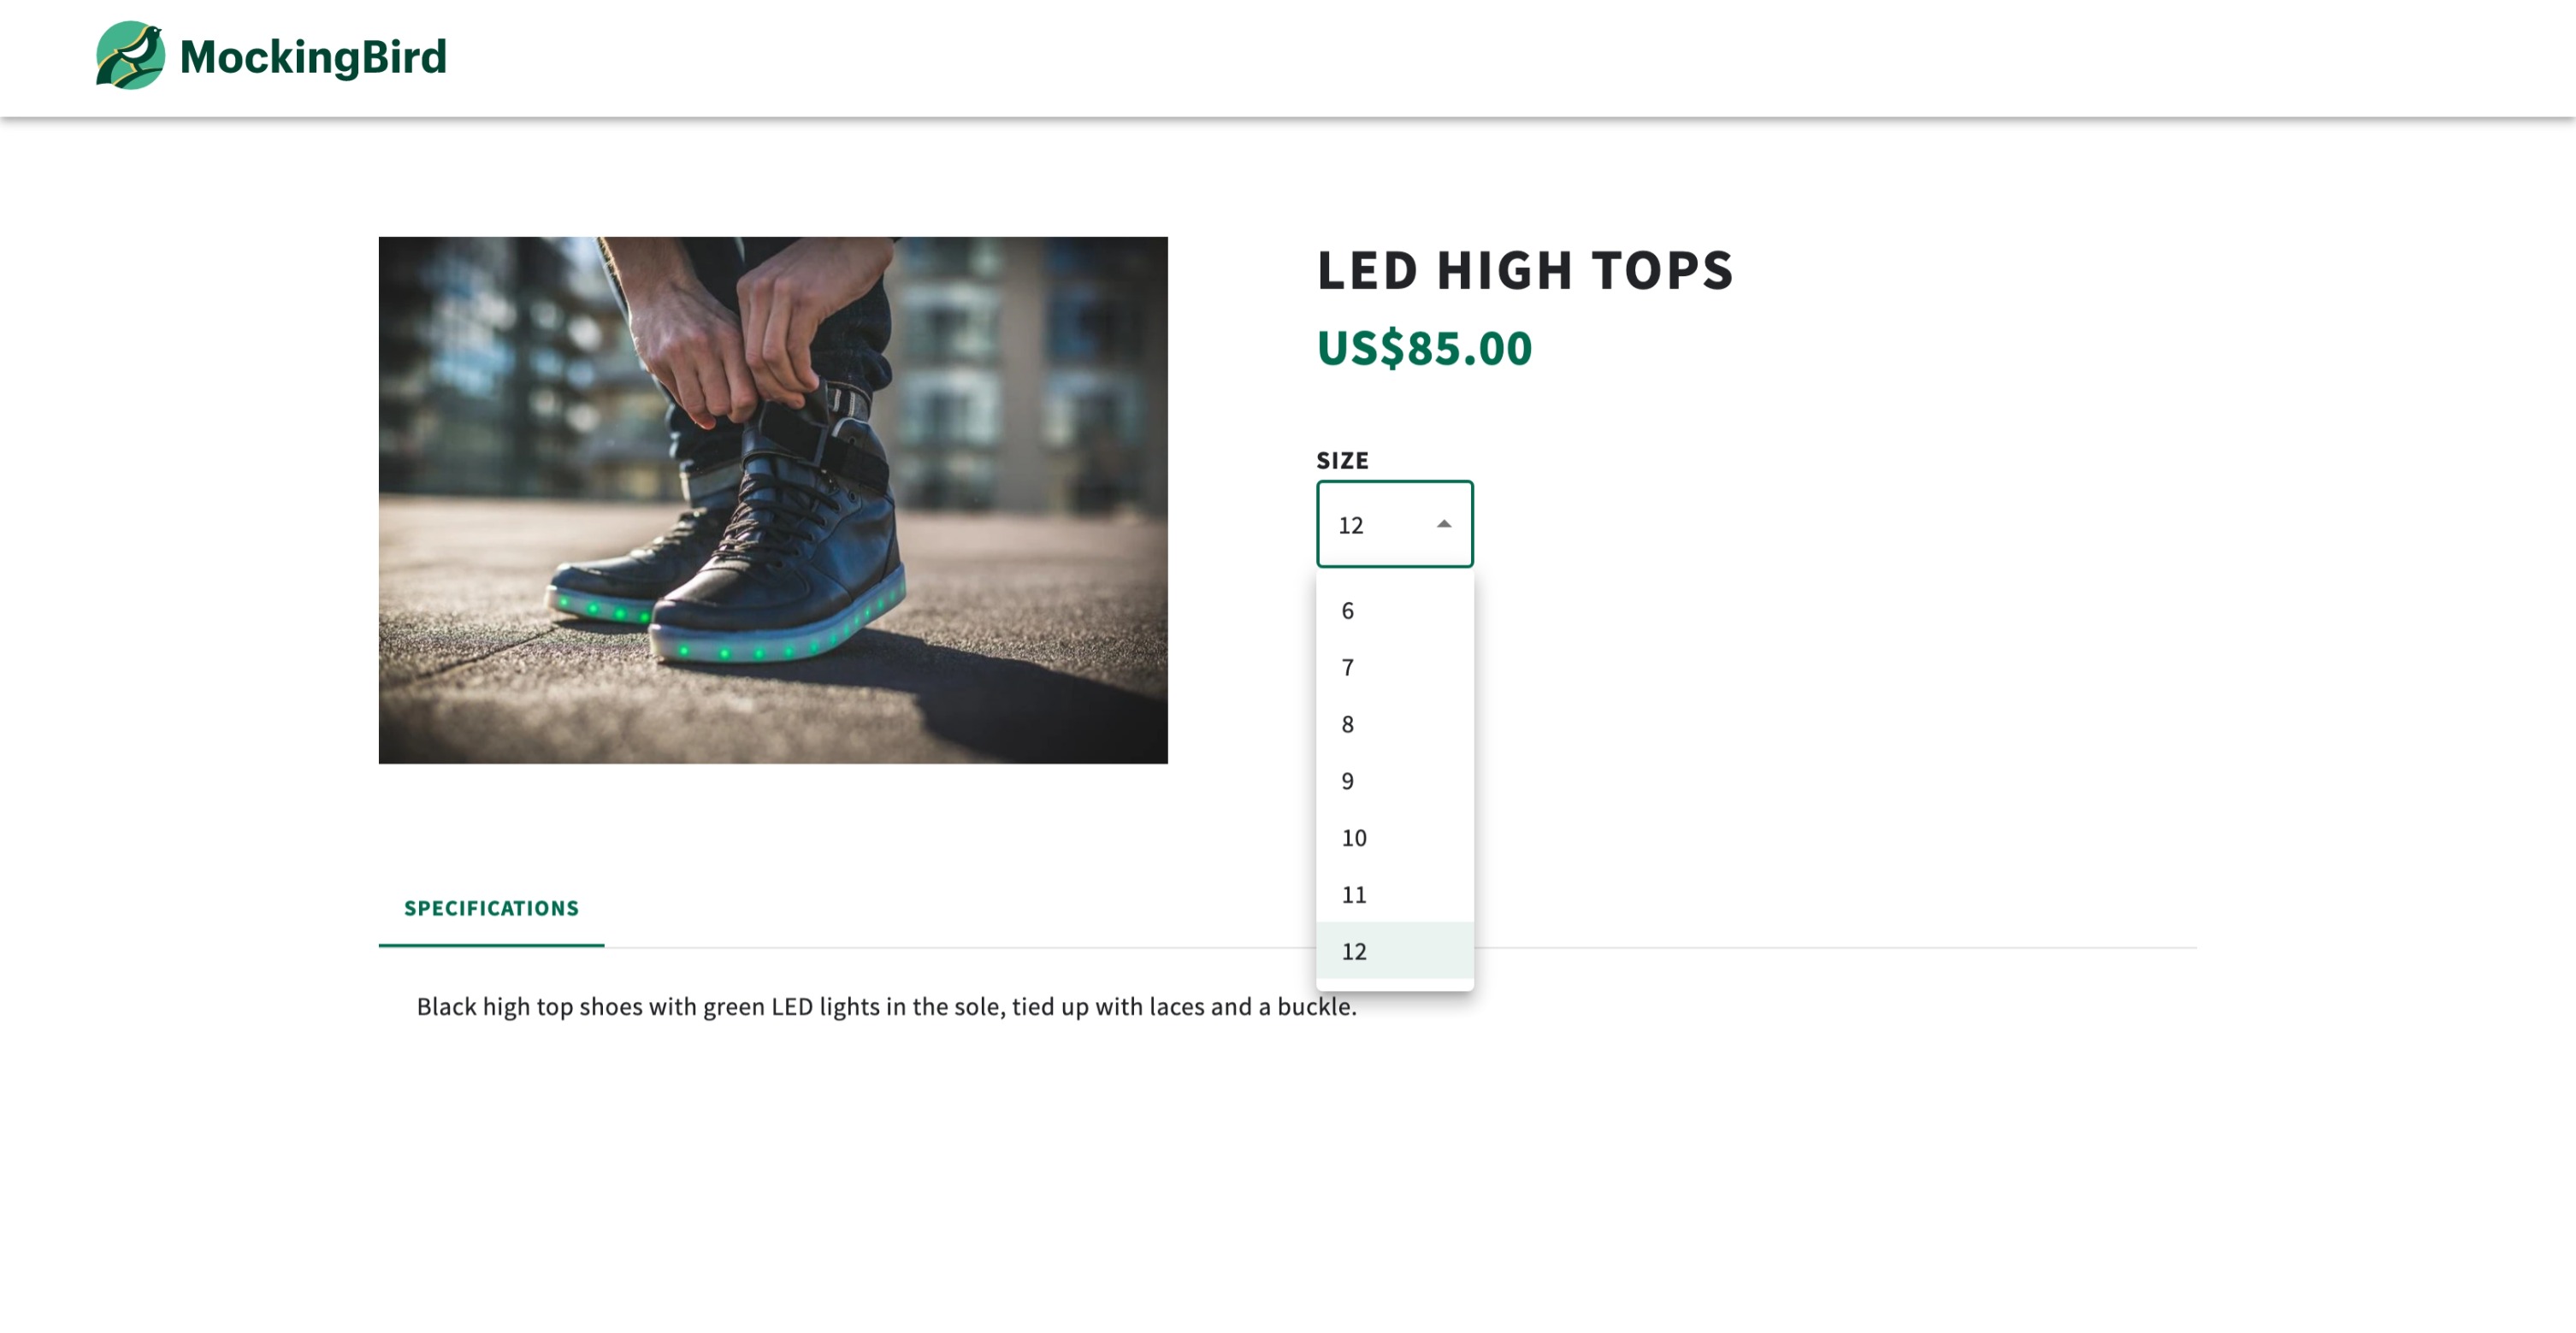 An image of the product page featuring LED high tops and a selected variant